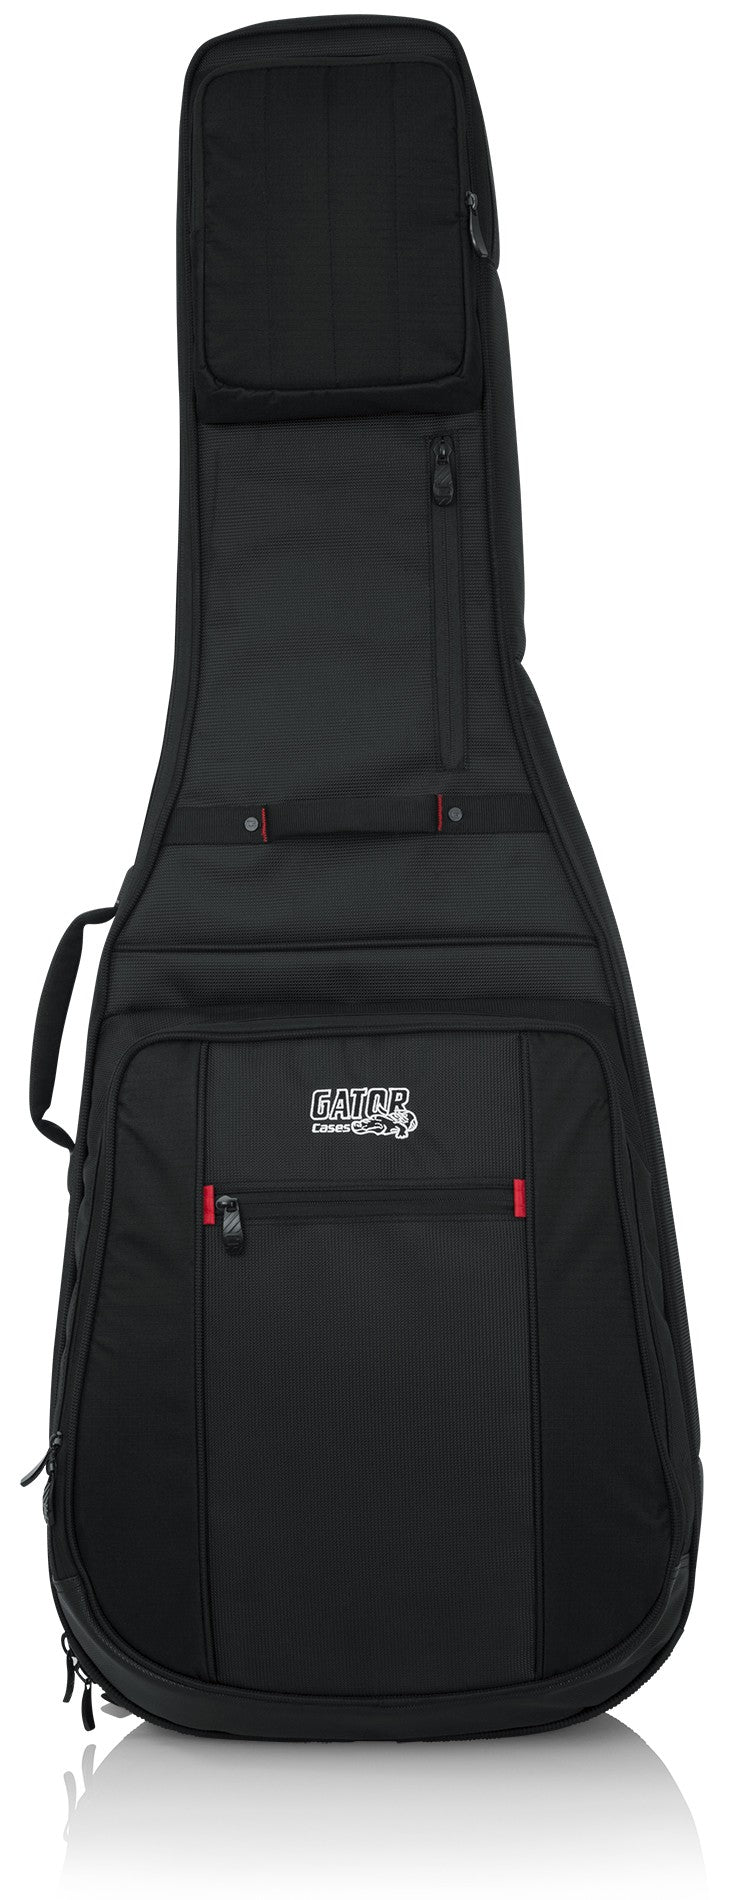 Gator Pro-Go Series 335/Flying V Style Guitar Bag with Micro Fleece Interior and Removable Backpack Straps